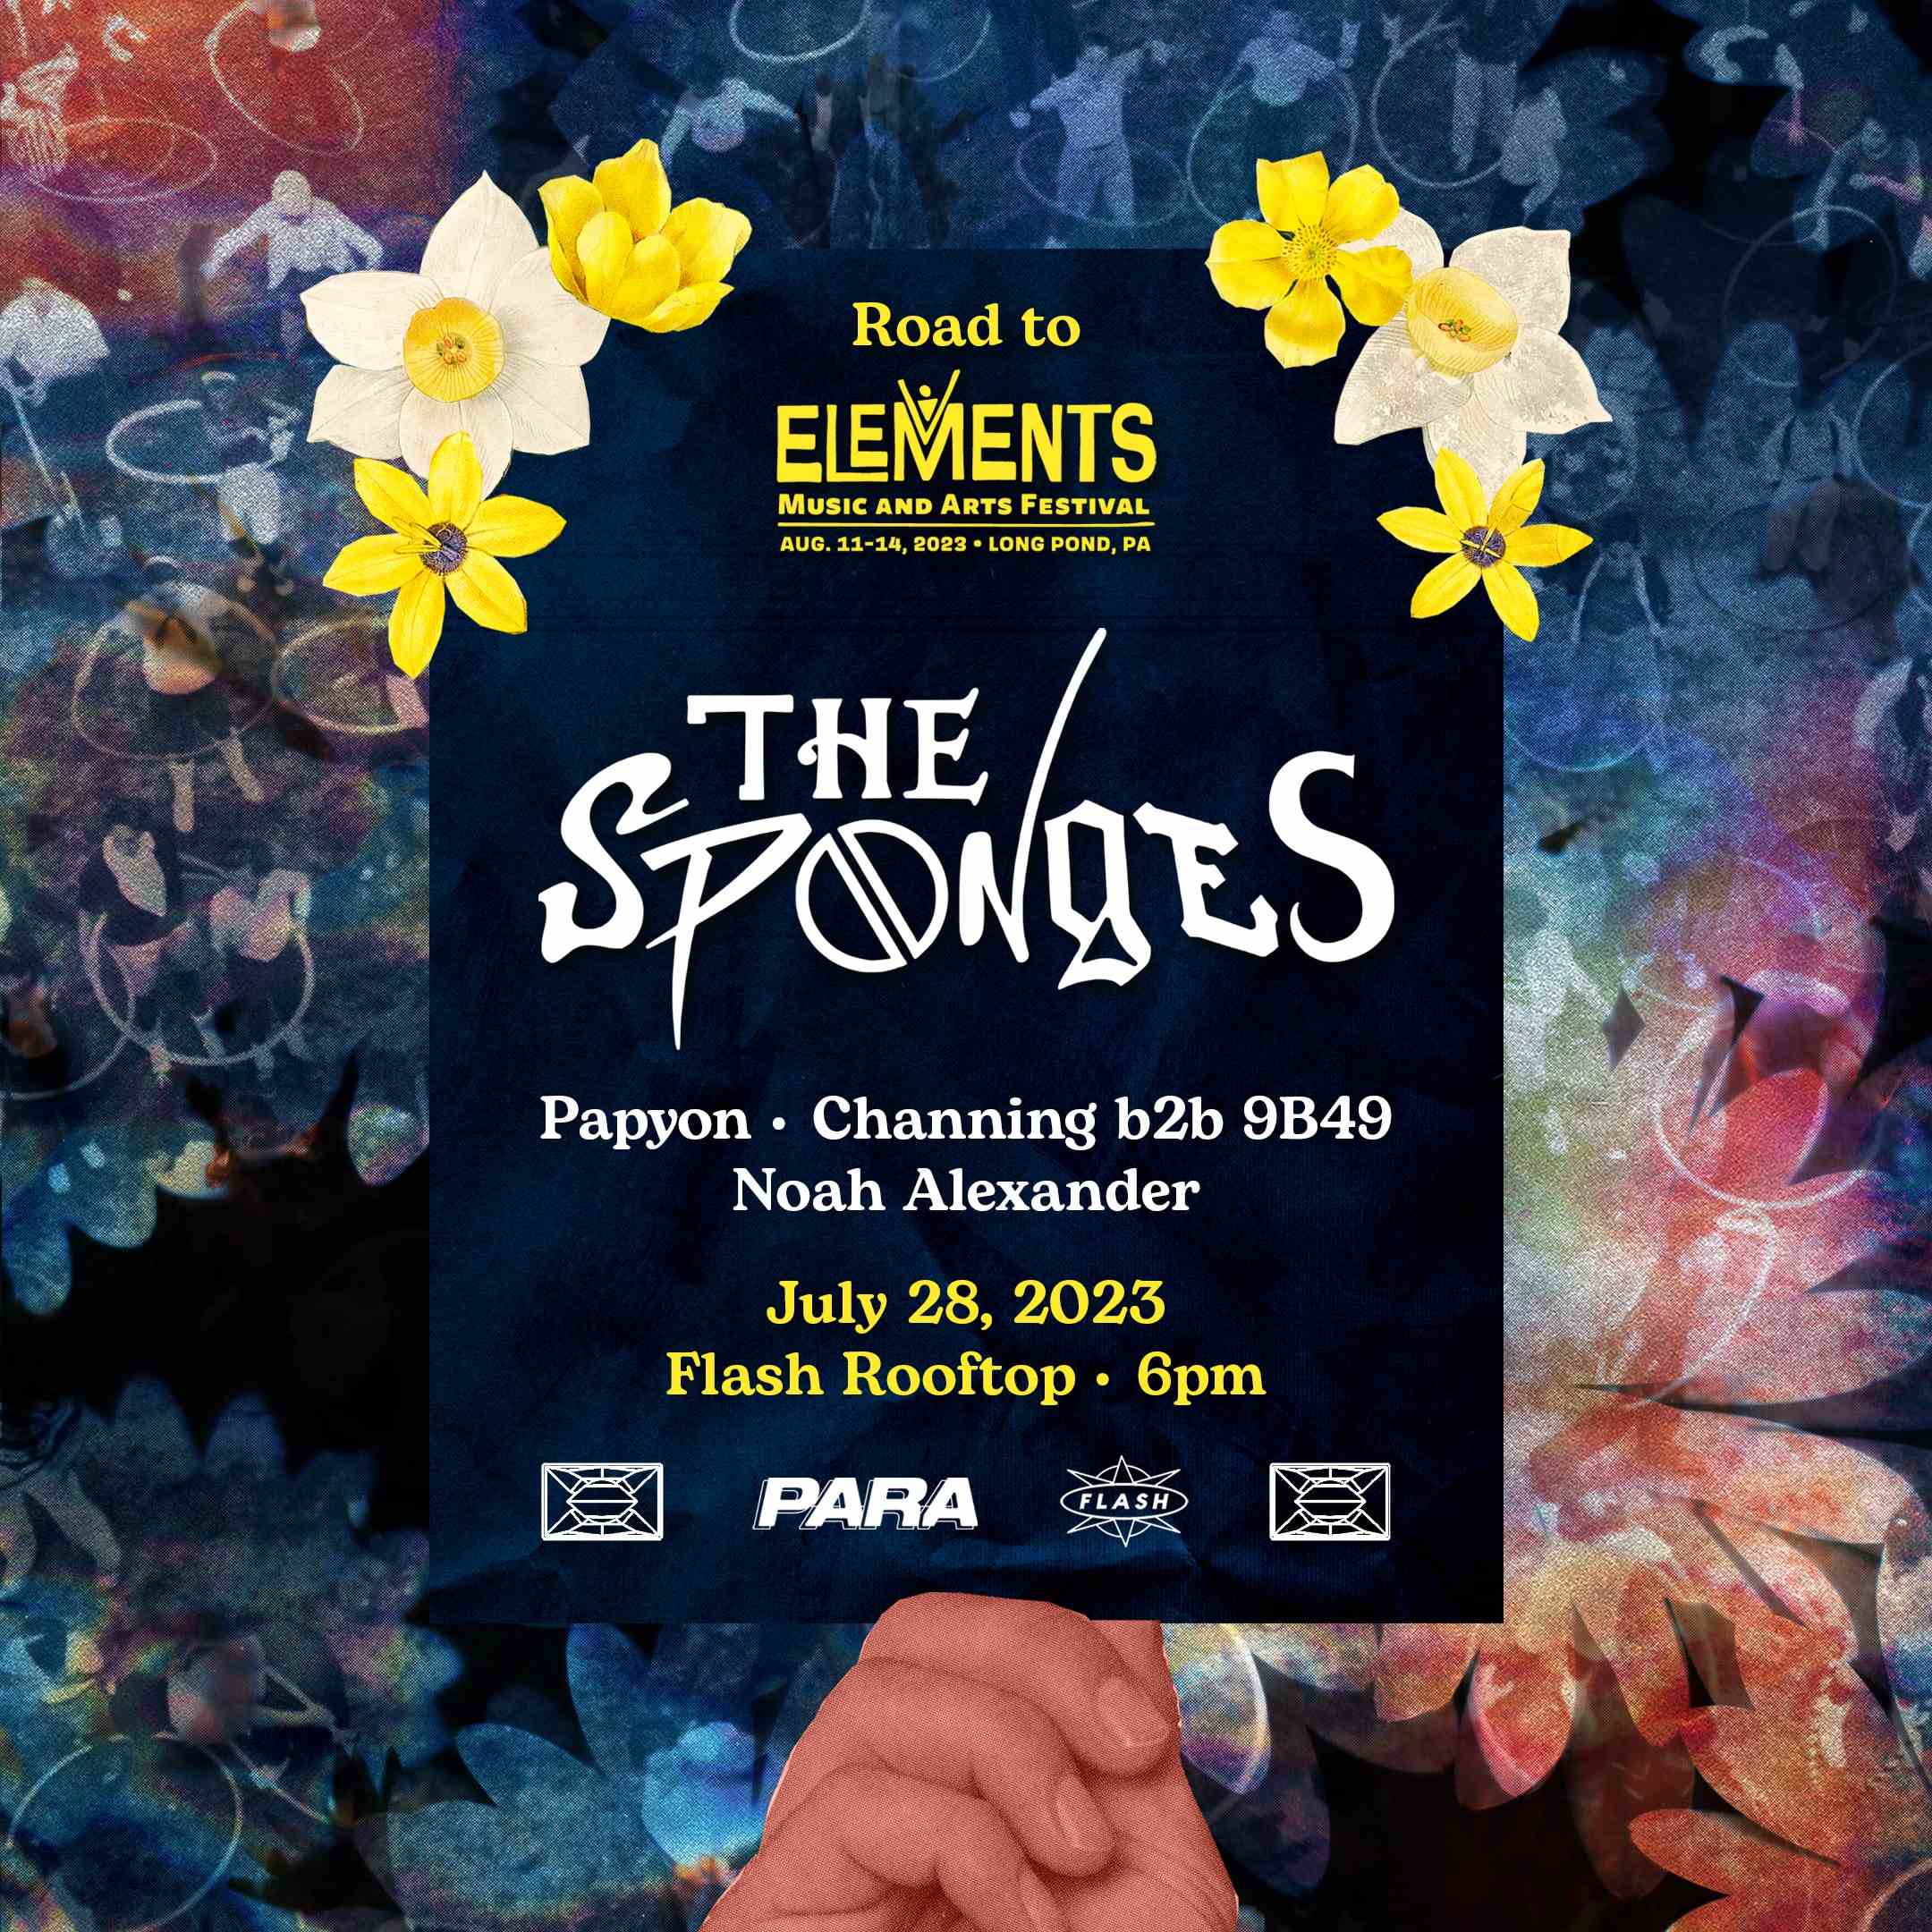 The Sponges at Flash Rooftop (early show) event flyer